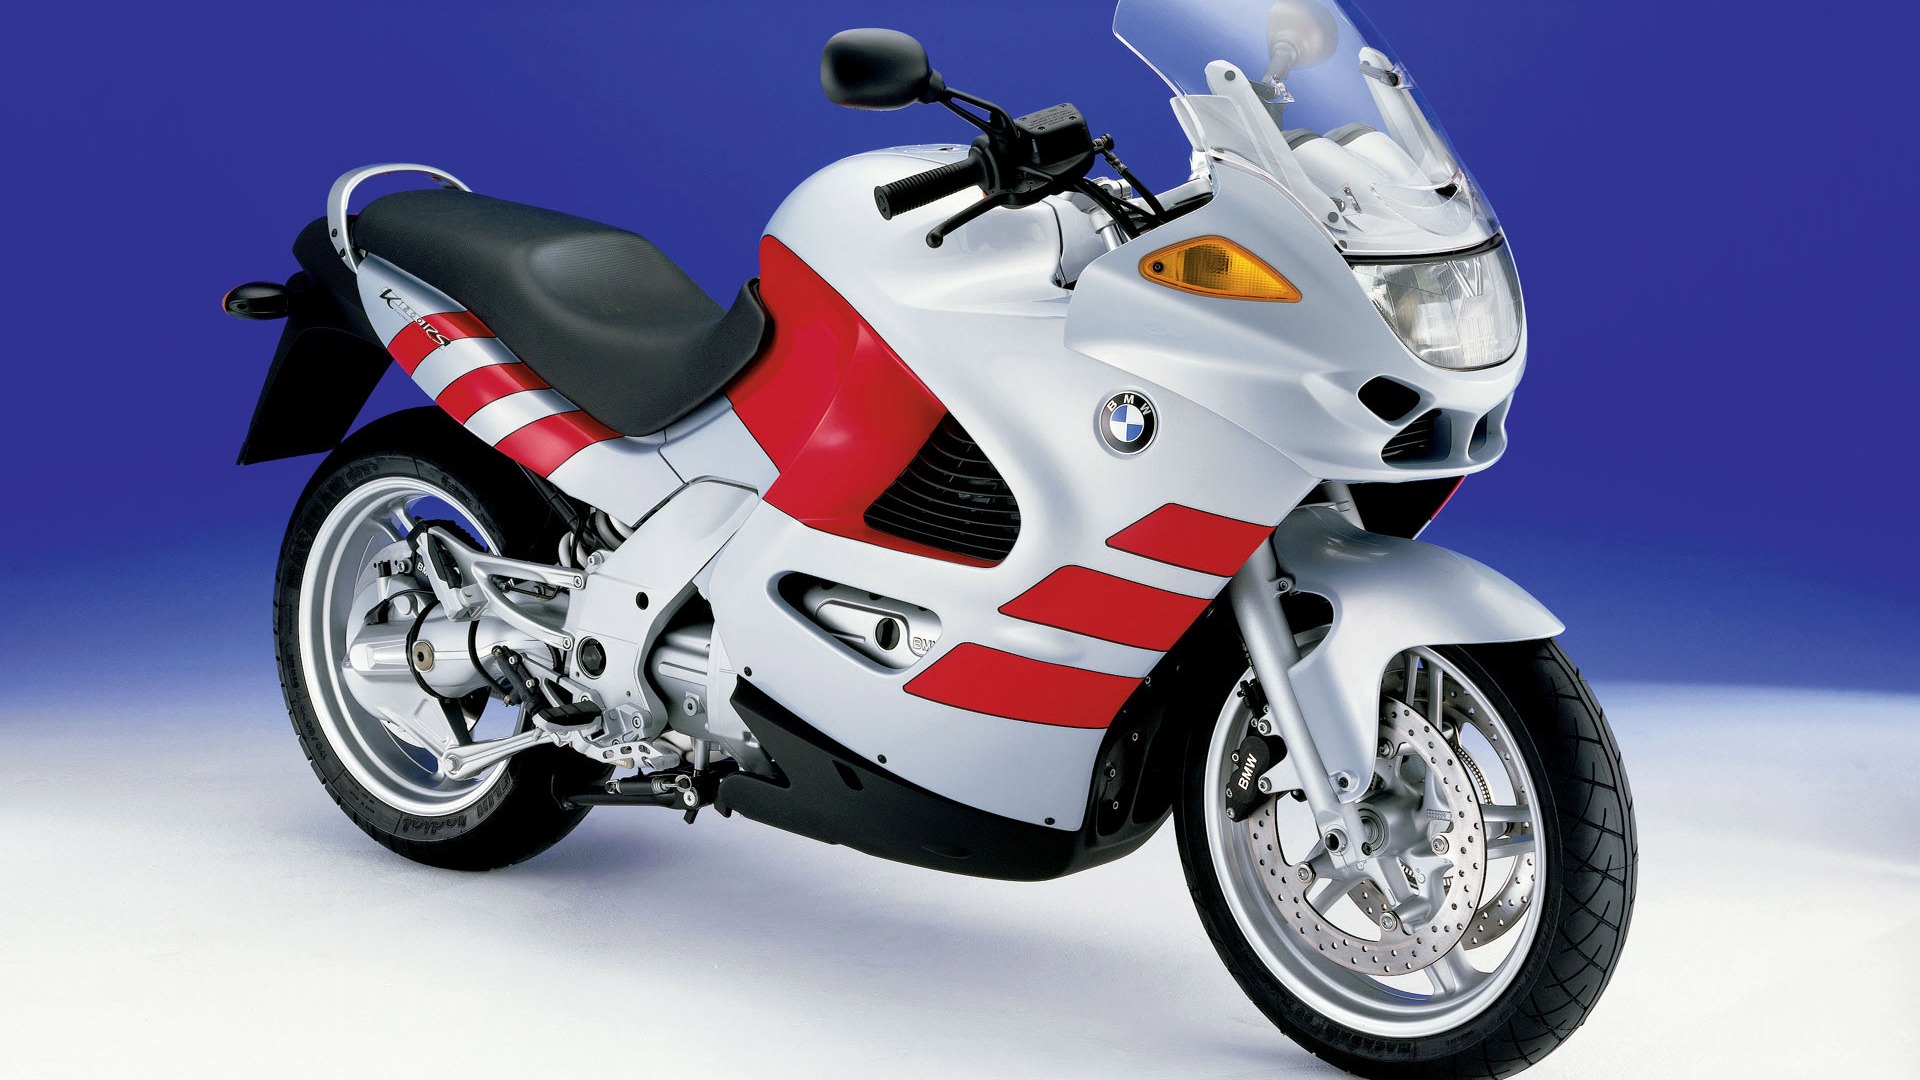 BMW motorcycle wallpapers (1) #1 - 1920x1080